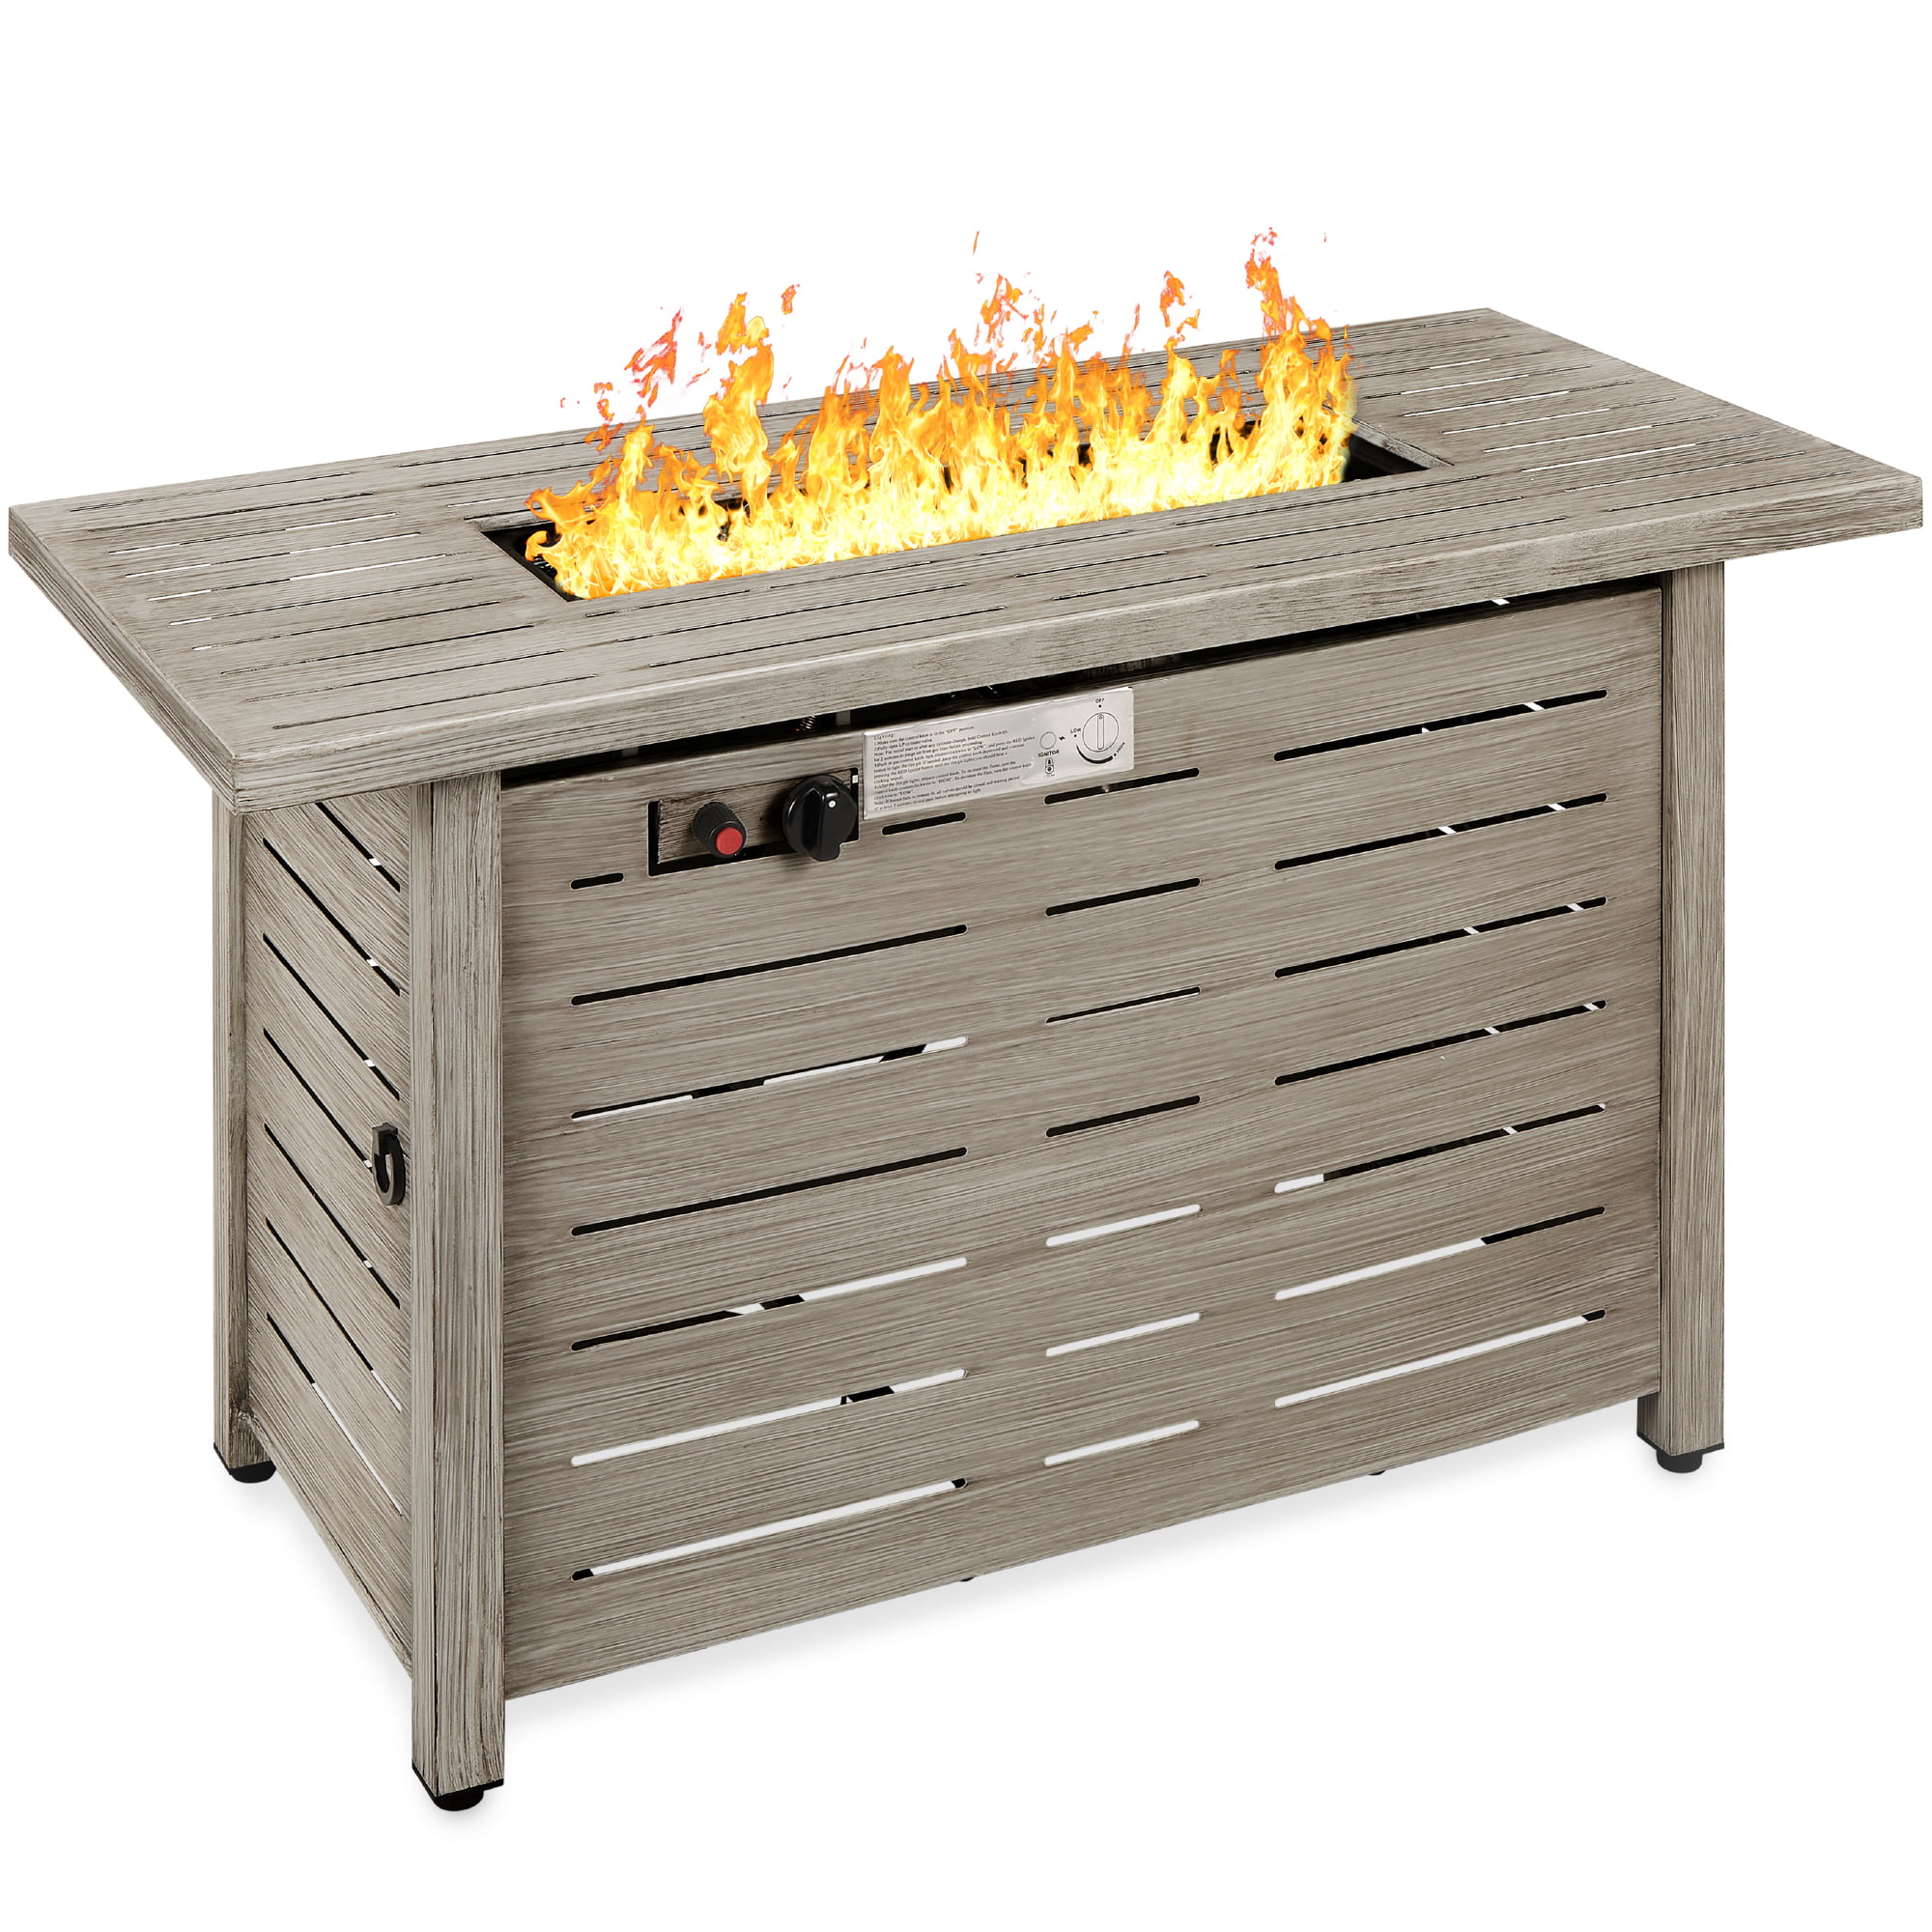 Fire Pit Table, Rectangular Outdoor Propane Gas Fire Pit Table In Gray